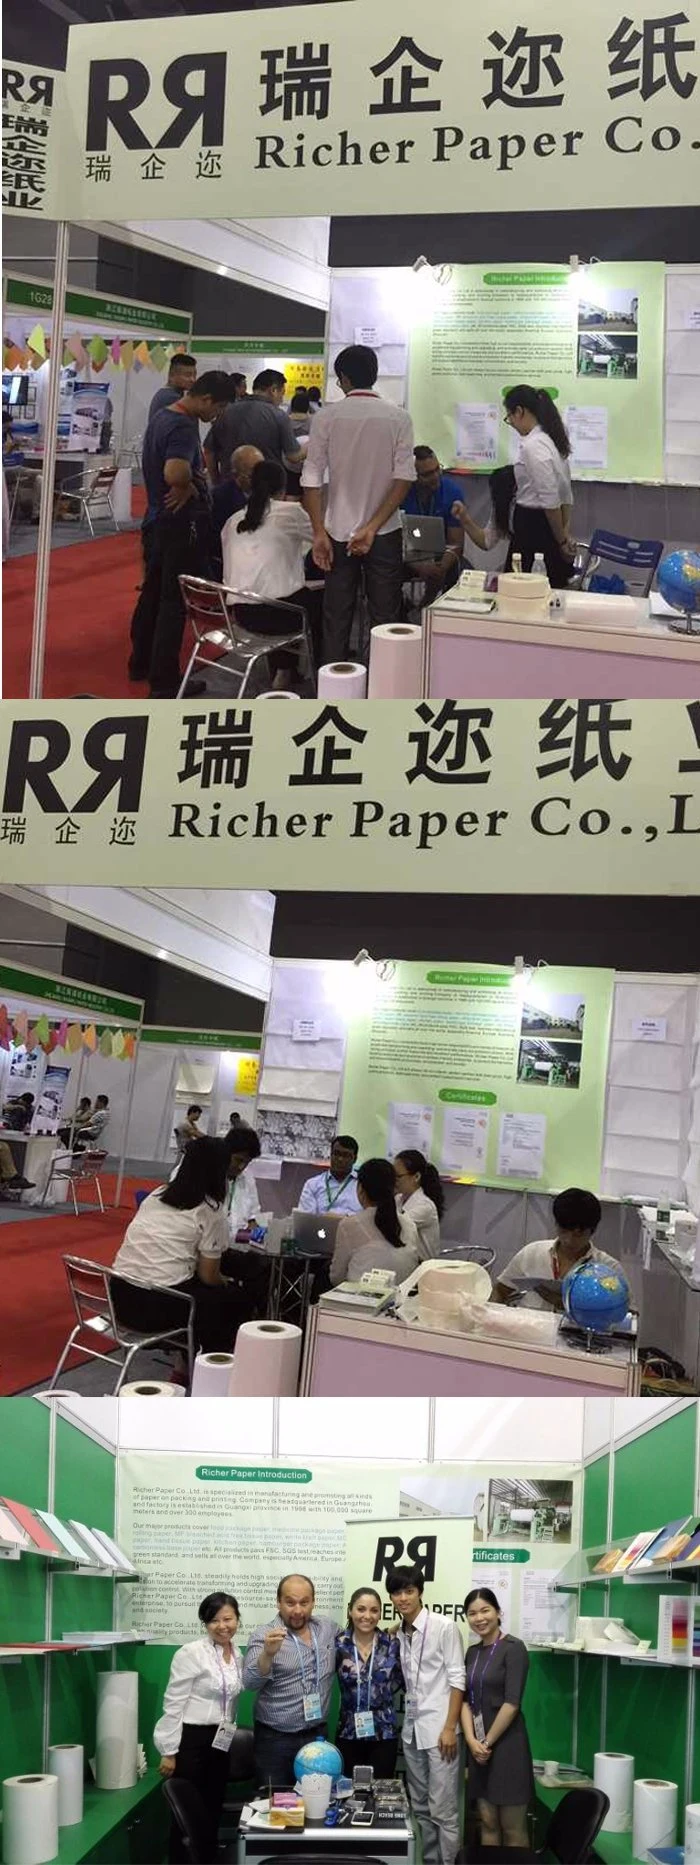 Richer Custom Brand Natural Gum Cigarette Tobacco Rolling Paper with Filter Tips